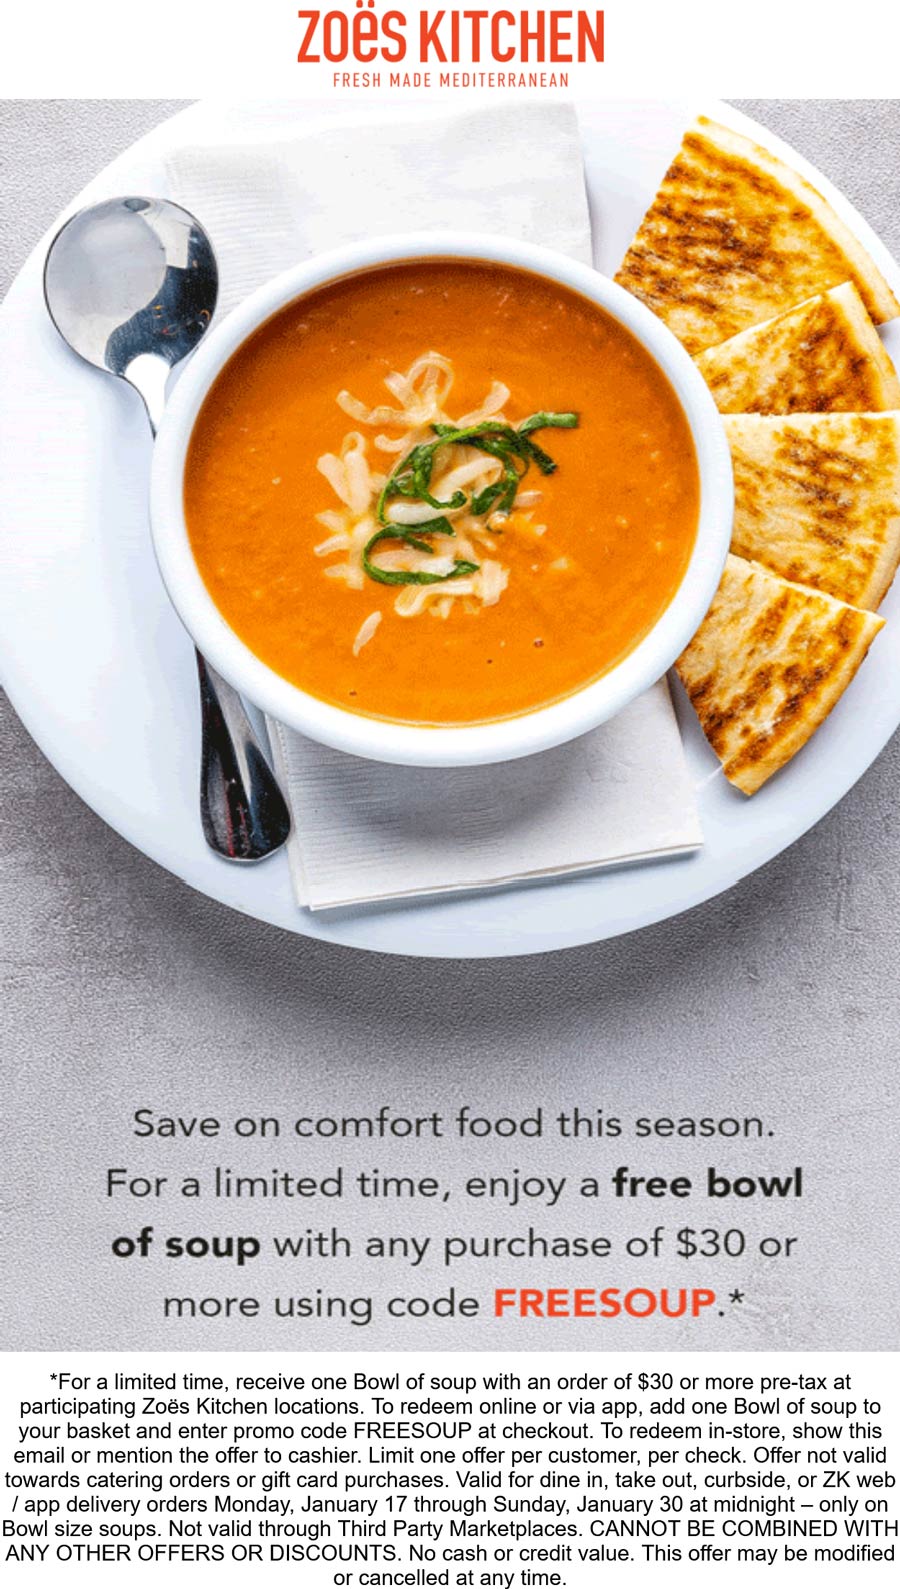 Zoes Kitchen restaurants Coupon  Free bowl of soup on $30 at Zoes Kitchen via promo code FREESOUP #zoeskitchen 